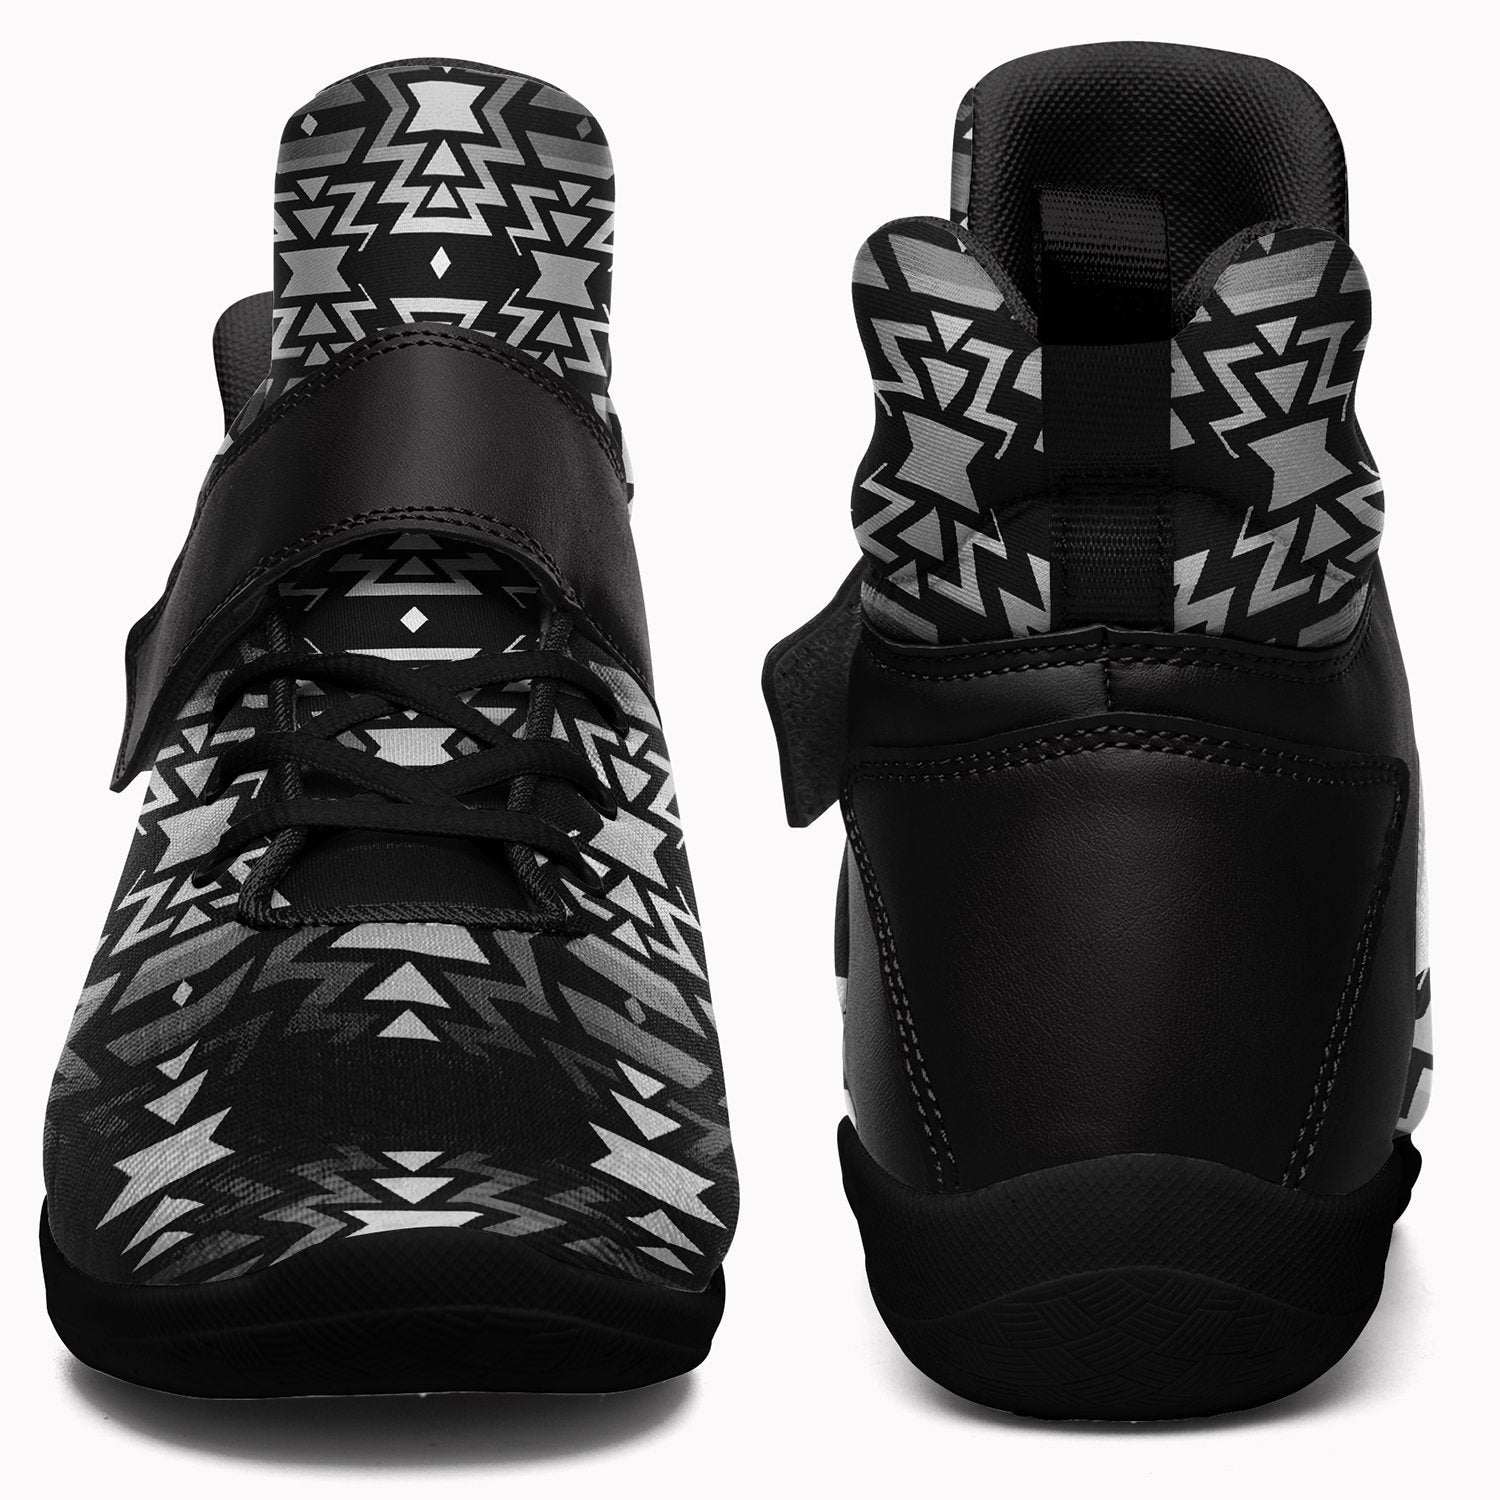 Black Fire Black and White Ipottaa Basketball / Sport High Top Shoes - Black Sole 49 Dzine 